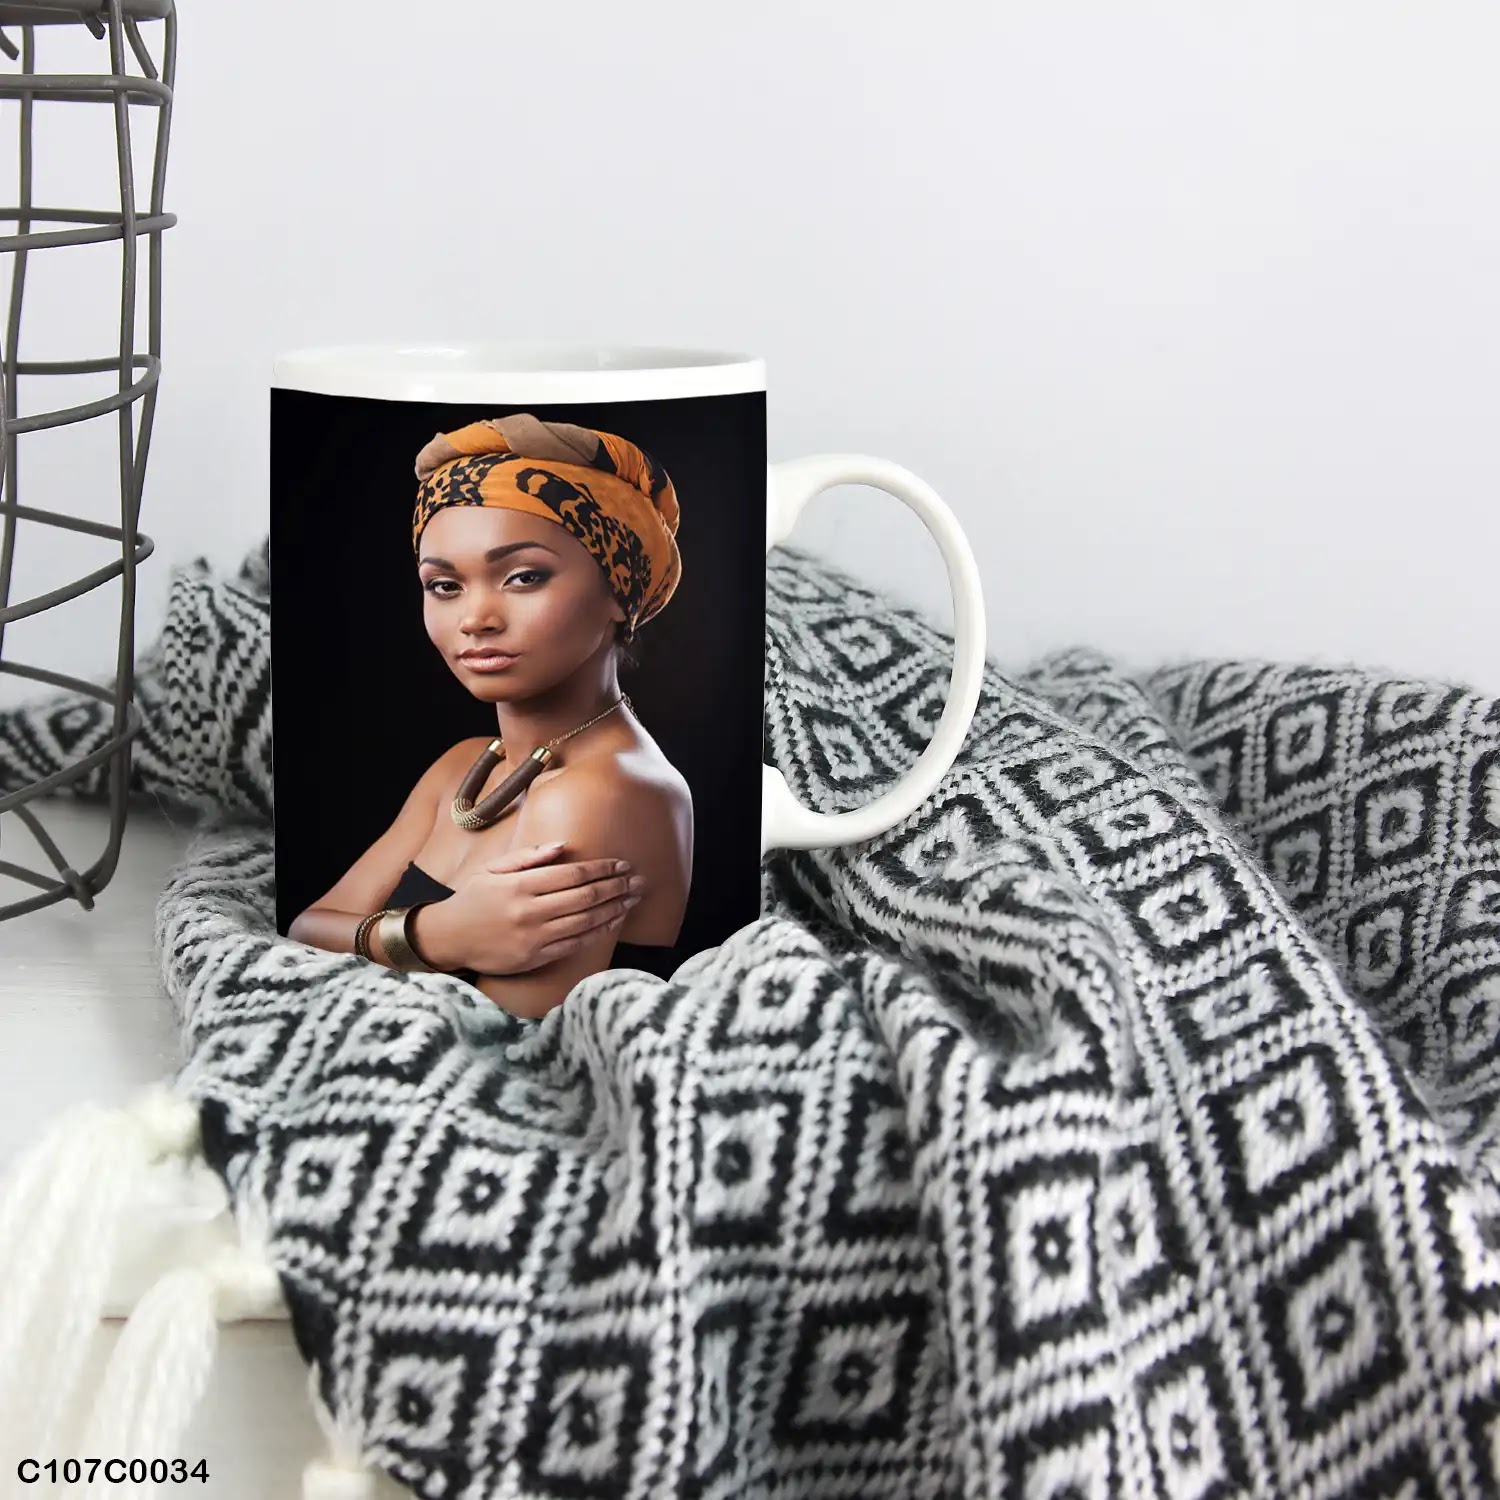 A mug (cup) printed with an image of an African woman